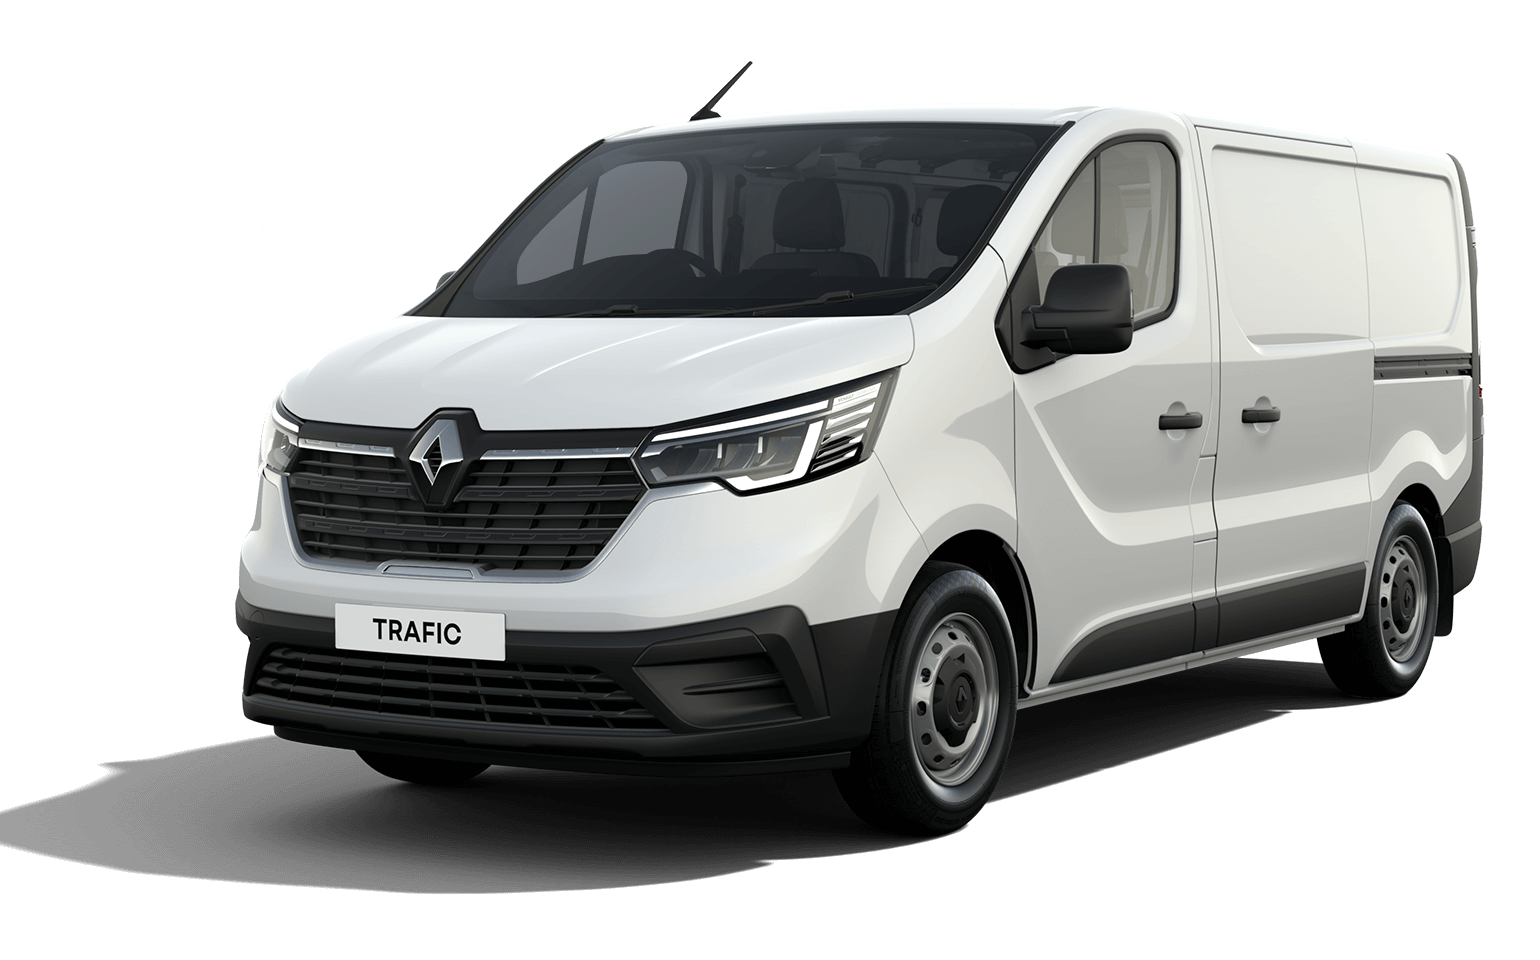 New Renault Trafic Passenger more 'car-like' then ever